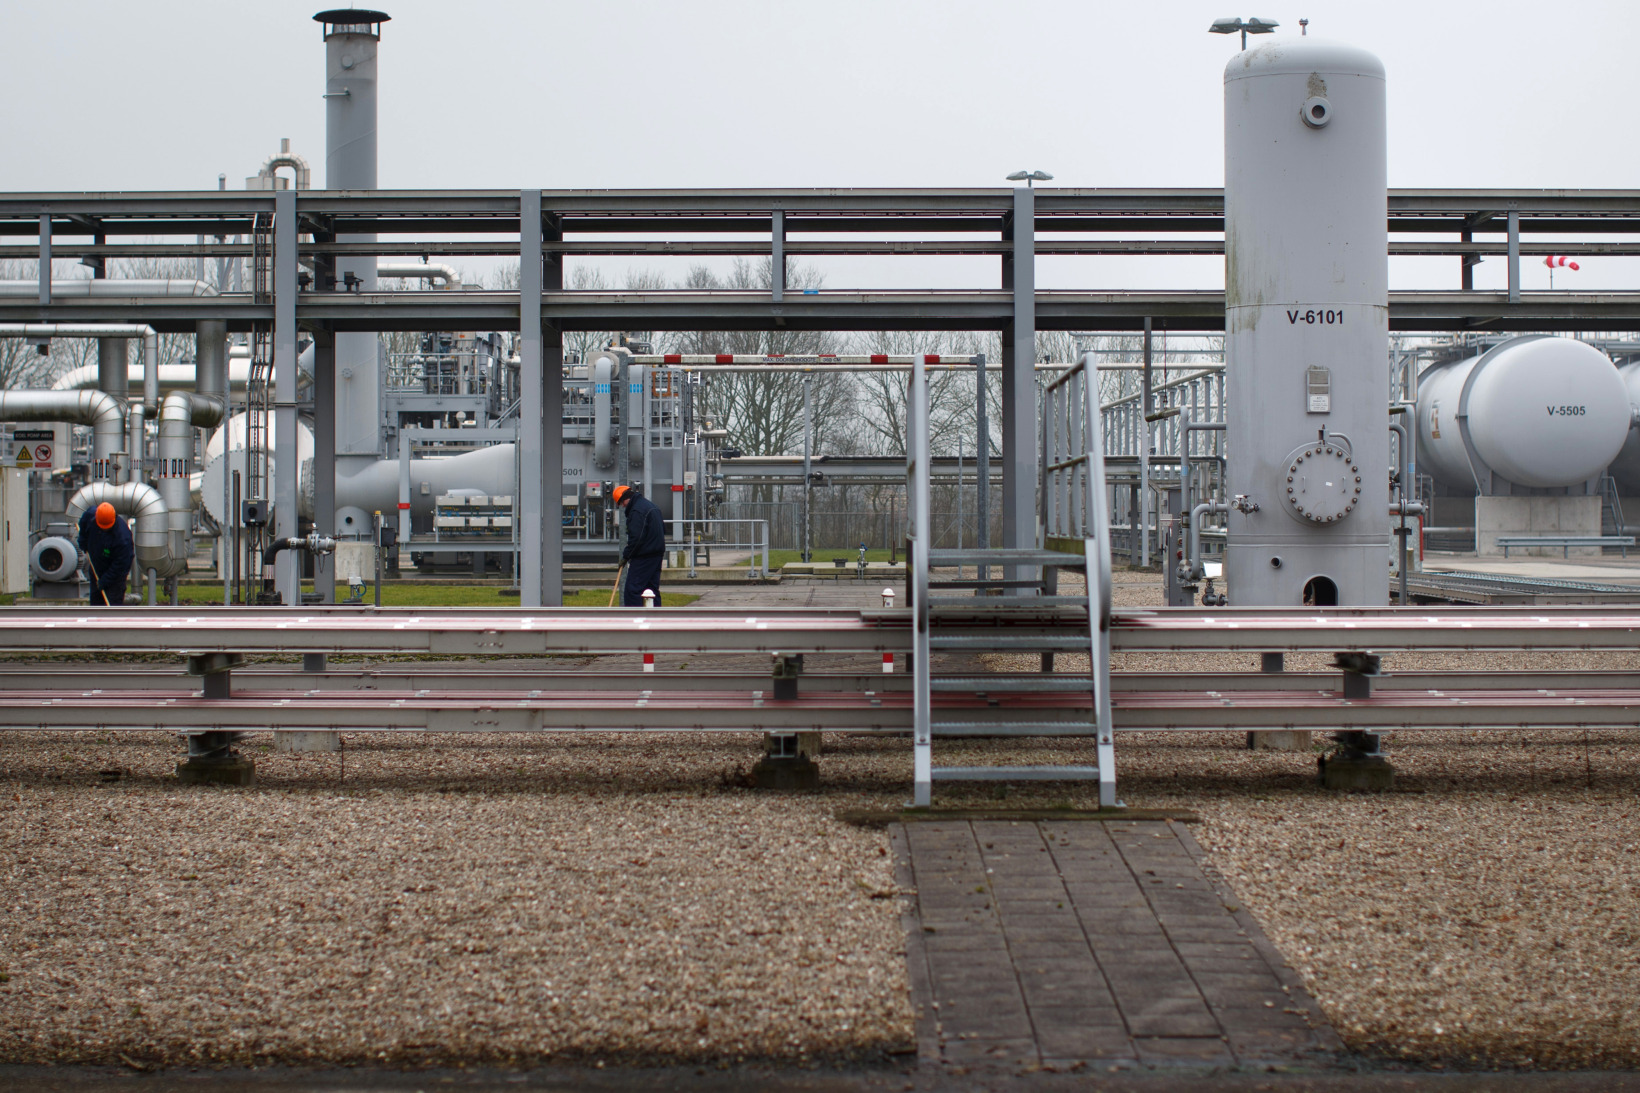 Views Of Groningen Gas Fields As Dutch Government To Pay $1.6 Billion In Extraction Damages